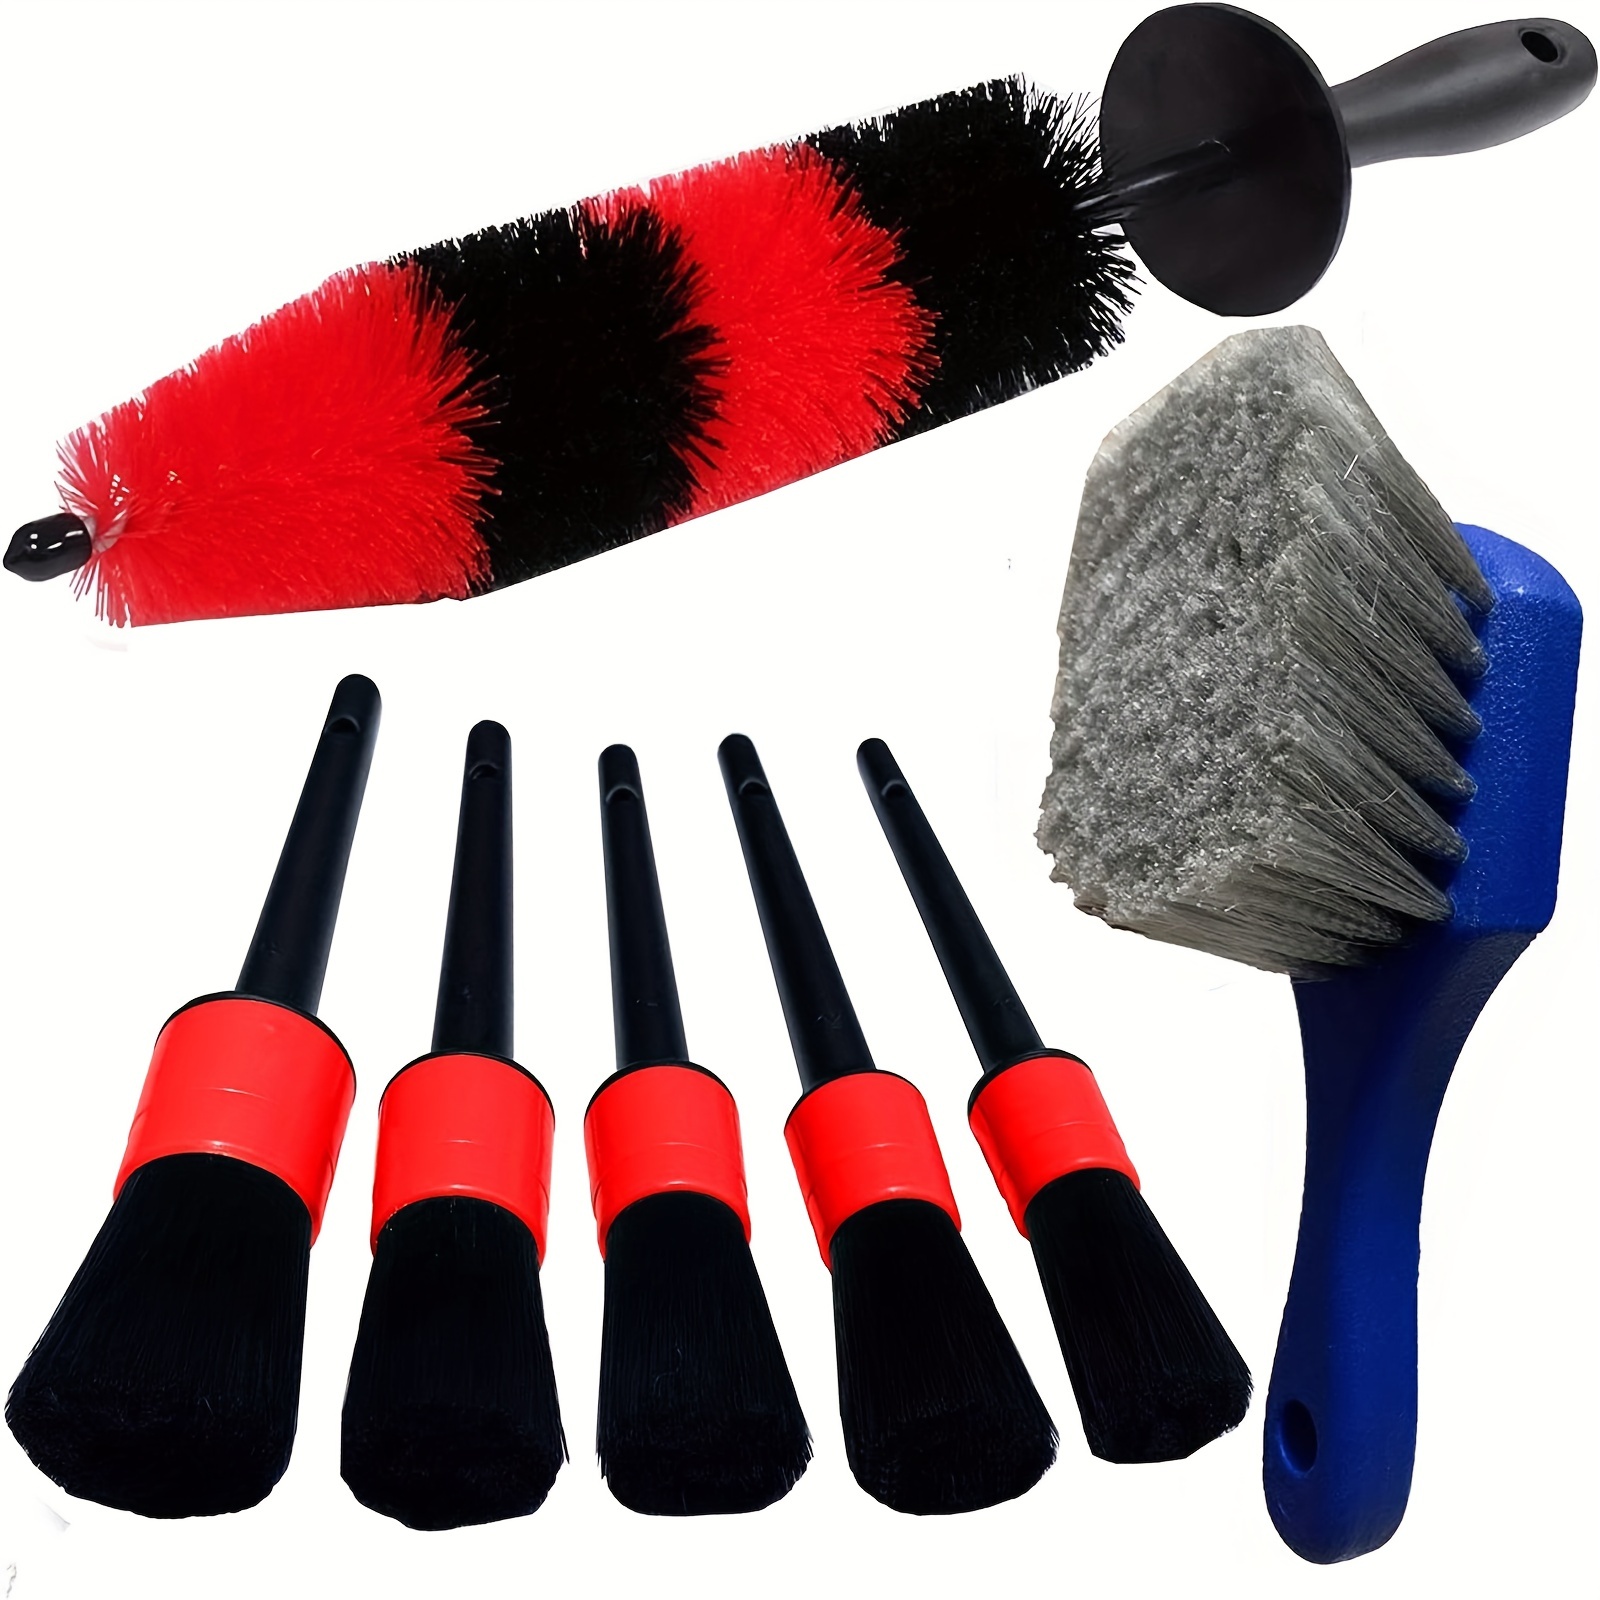 12Pcs Wheel Brush Kit for Cleaning Wheel and Tire, Wheel and Rim Brush, Car  Detailing Brushes, Tire Brush, Bendable & Durable Car Wheel Rim Cleaner